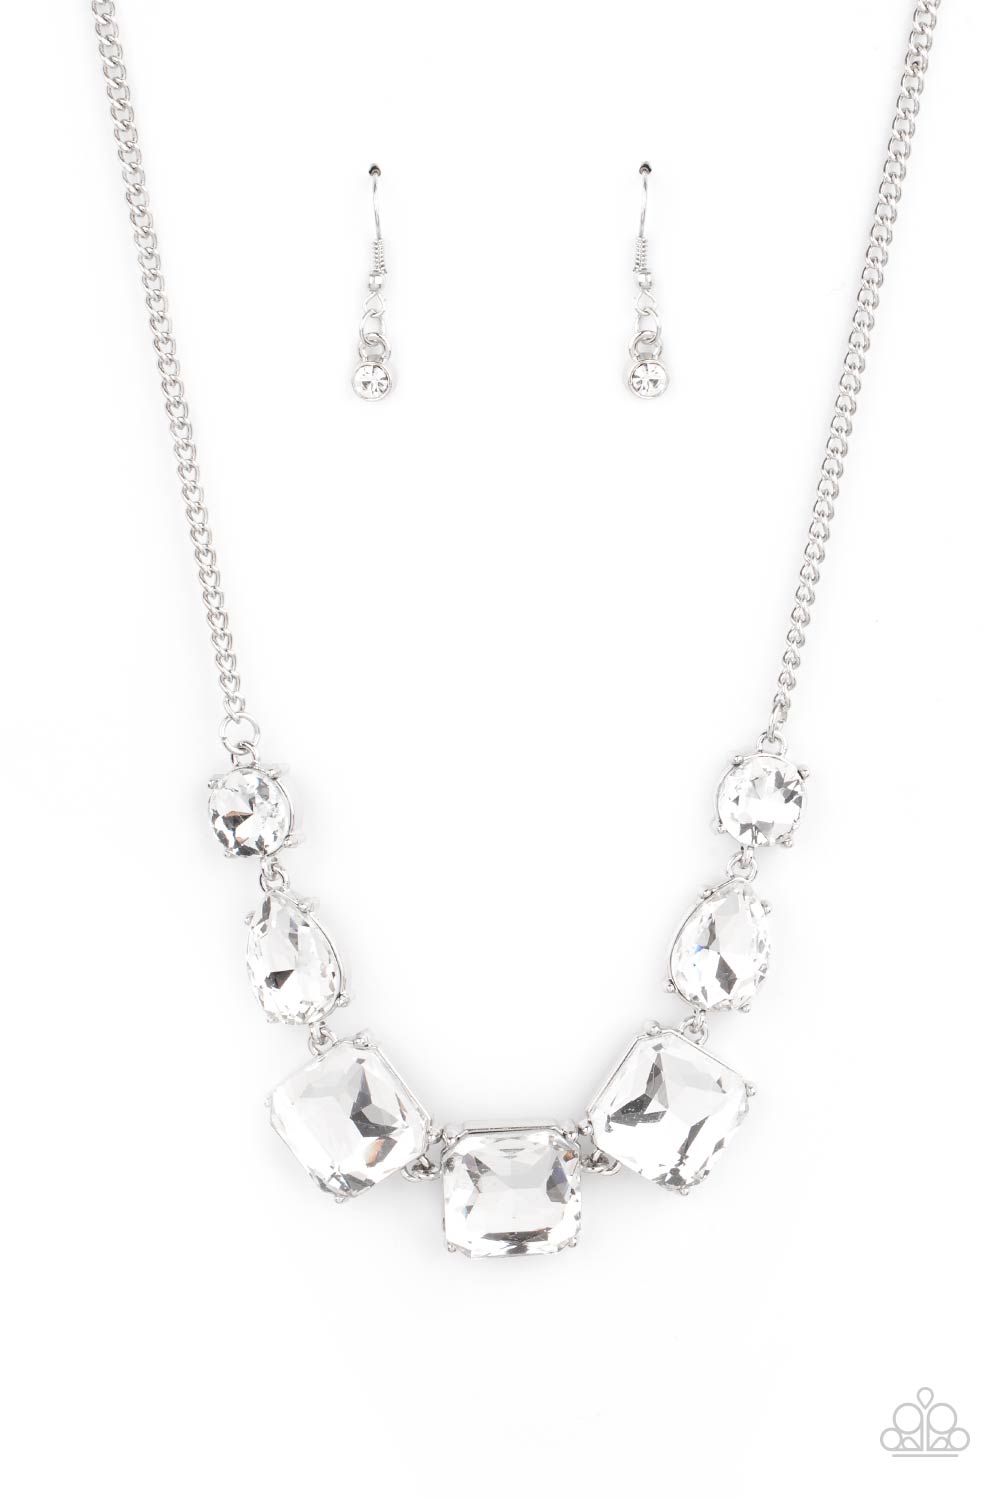 Unfiltered Confidence White Necklace - Paparazzi Accessories  A trio of brilliant white square gut gems encased in classic silver fittings takes center stage. Teardrop and round gems link to a silver chain on either side of the trio for a striking display below the collar. Features an adjustable clasp closure.  All Paparazzi Accessories are lead free and nickel free!  Sold as one individual necklace. Includes one pair of matching earrings.